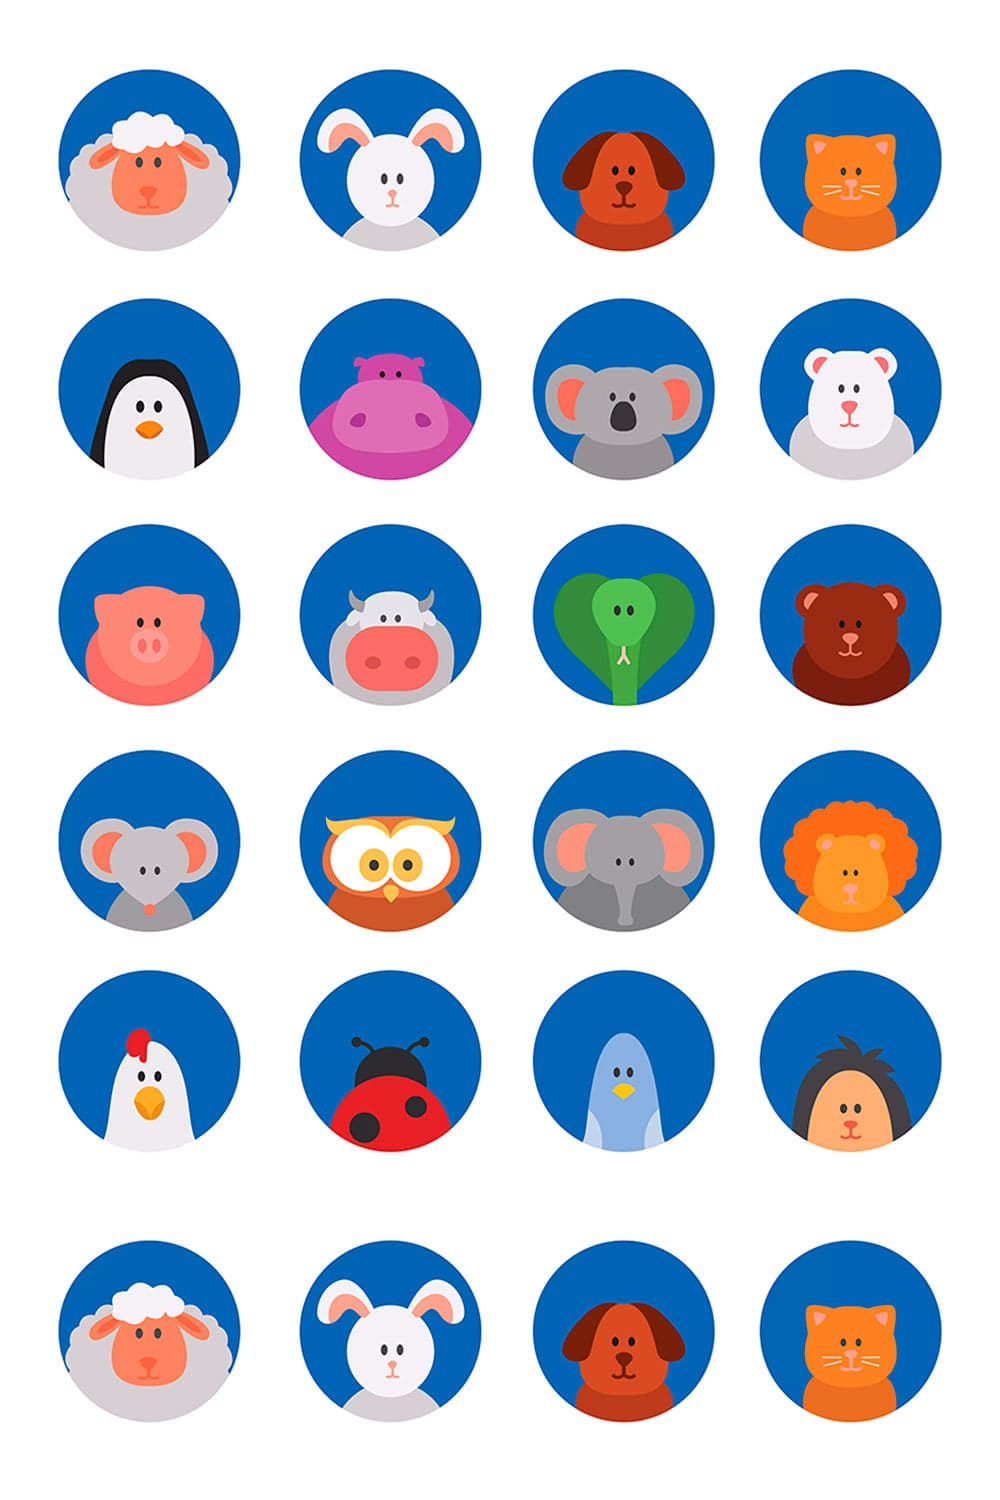 20 rounded animals icons, picture for pinterest.